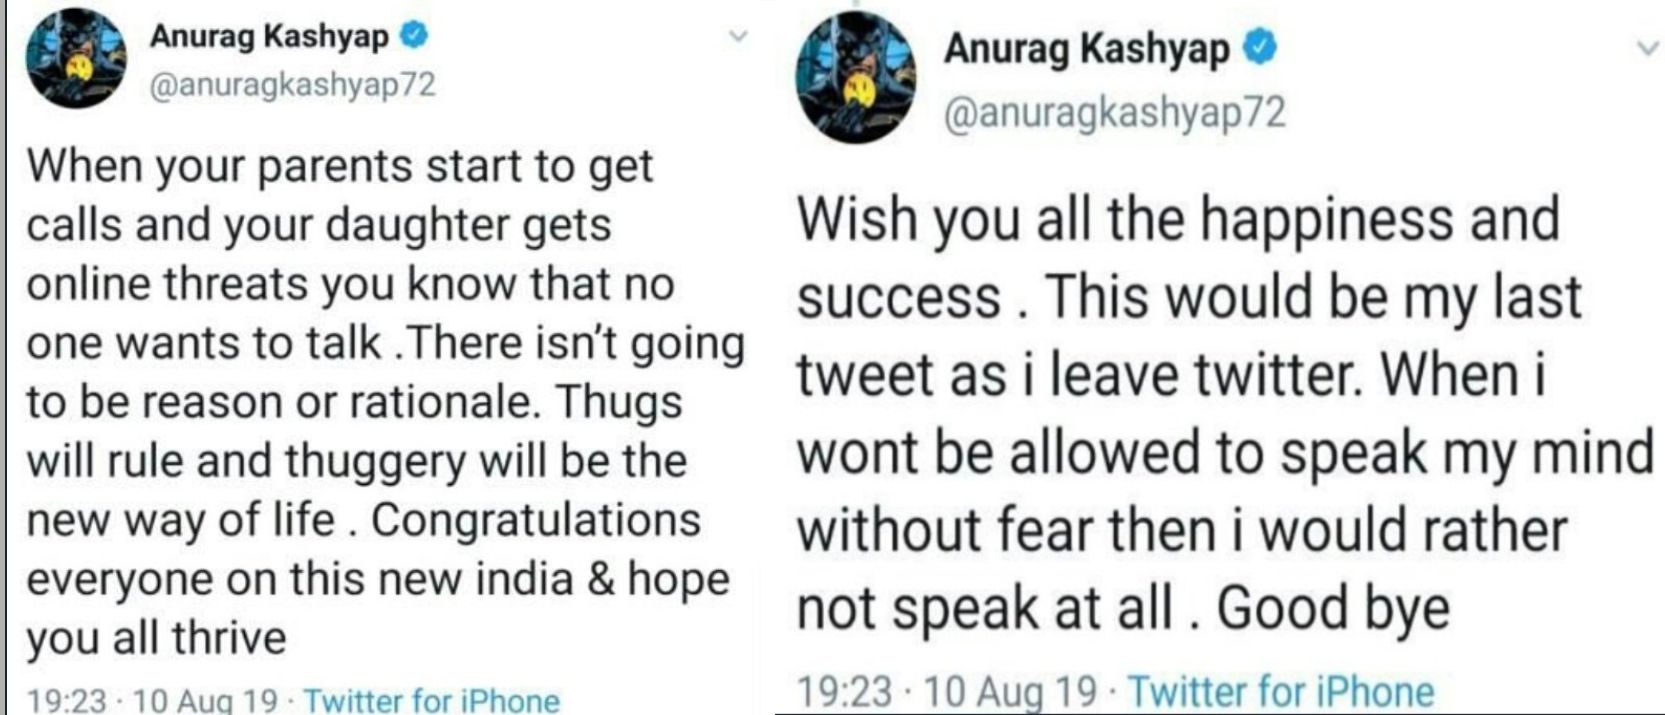 anurag kashyap not allowed to speak twitter account deleted - Satya Hindi